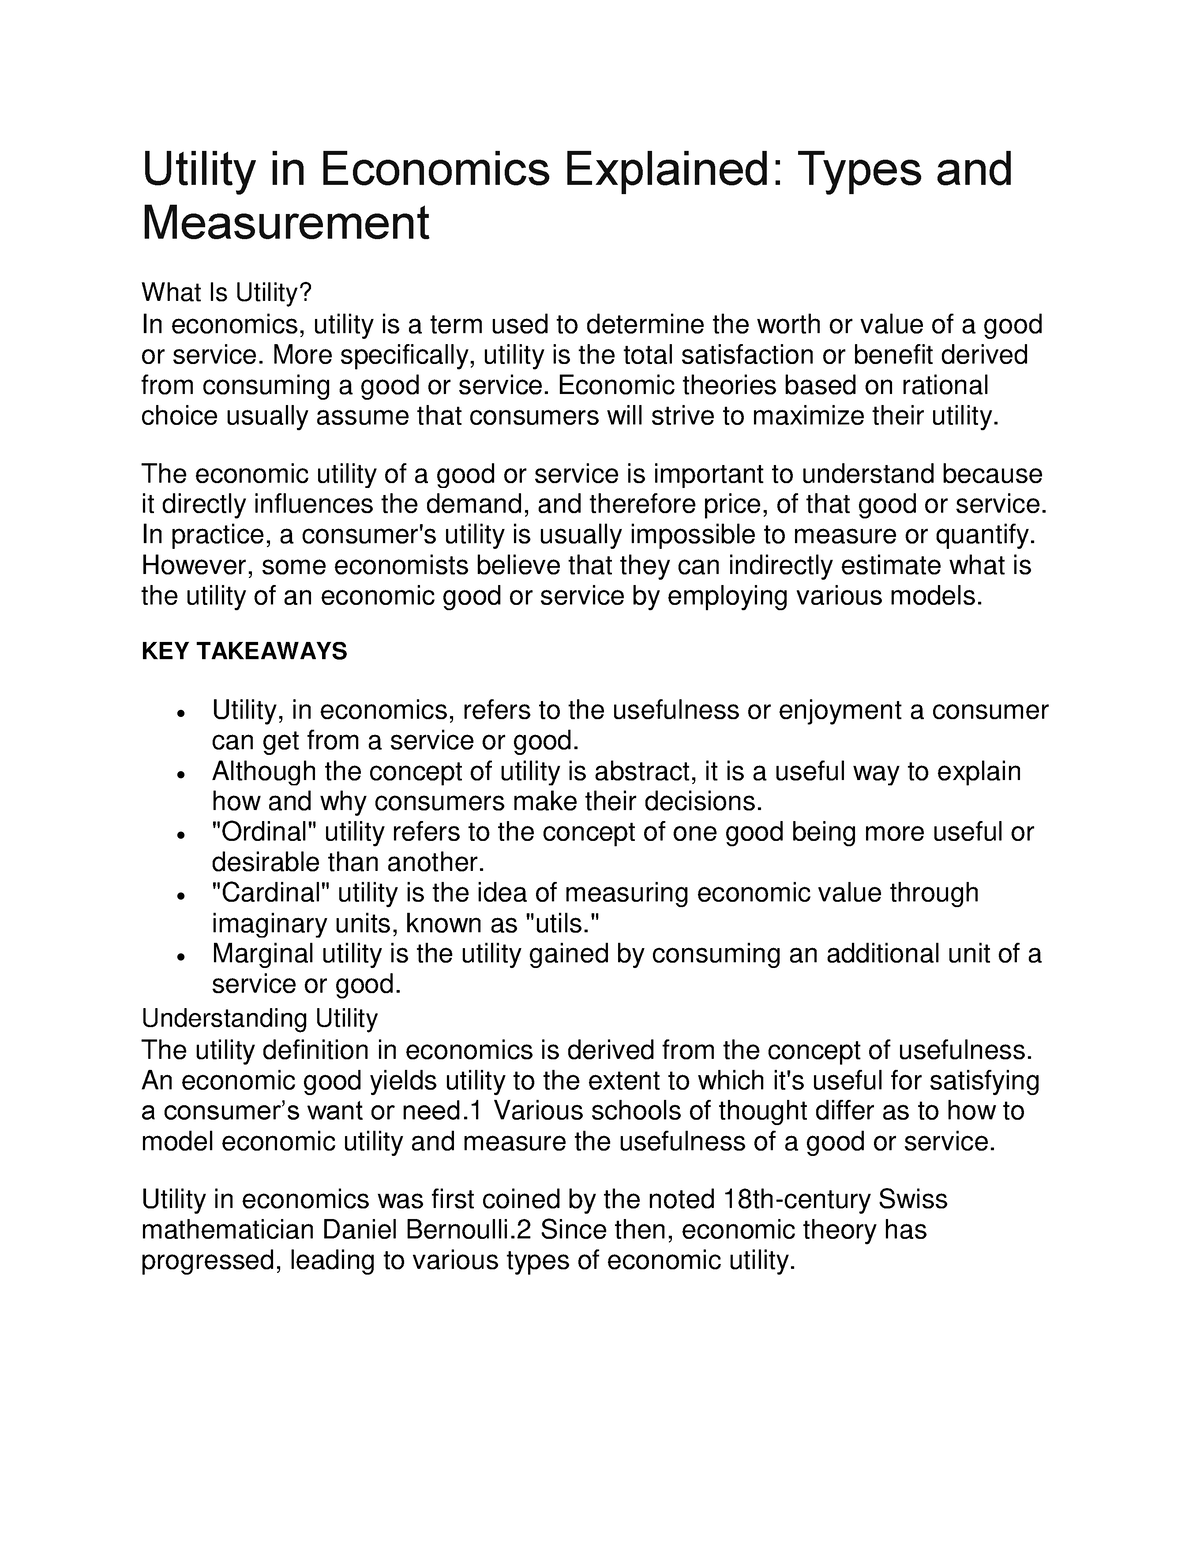 Utility in Economics Explained: Types and Measurement